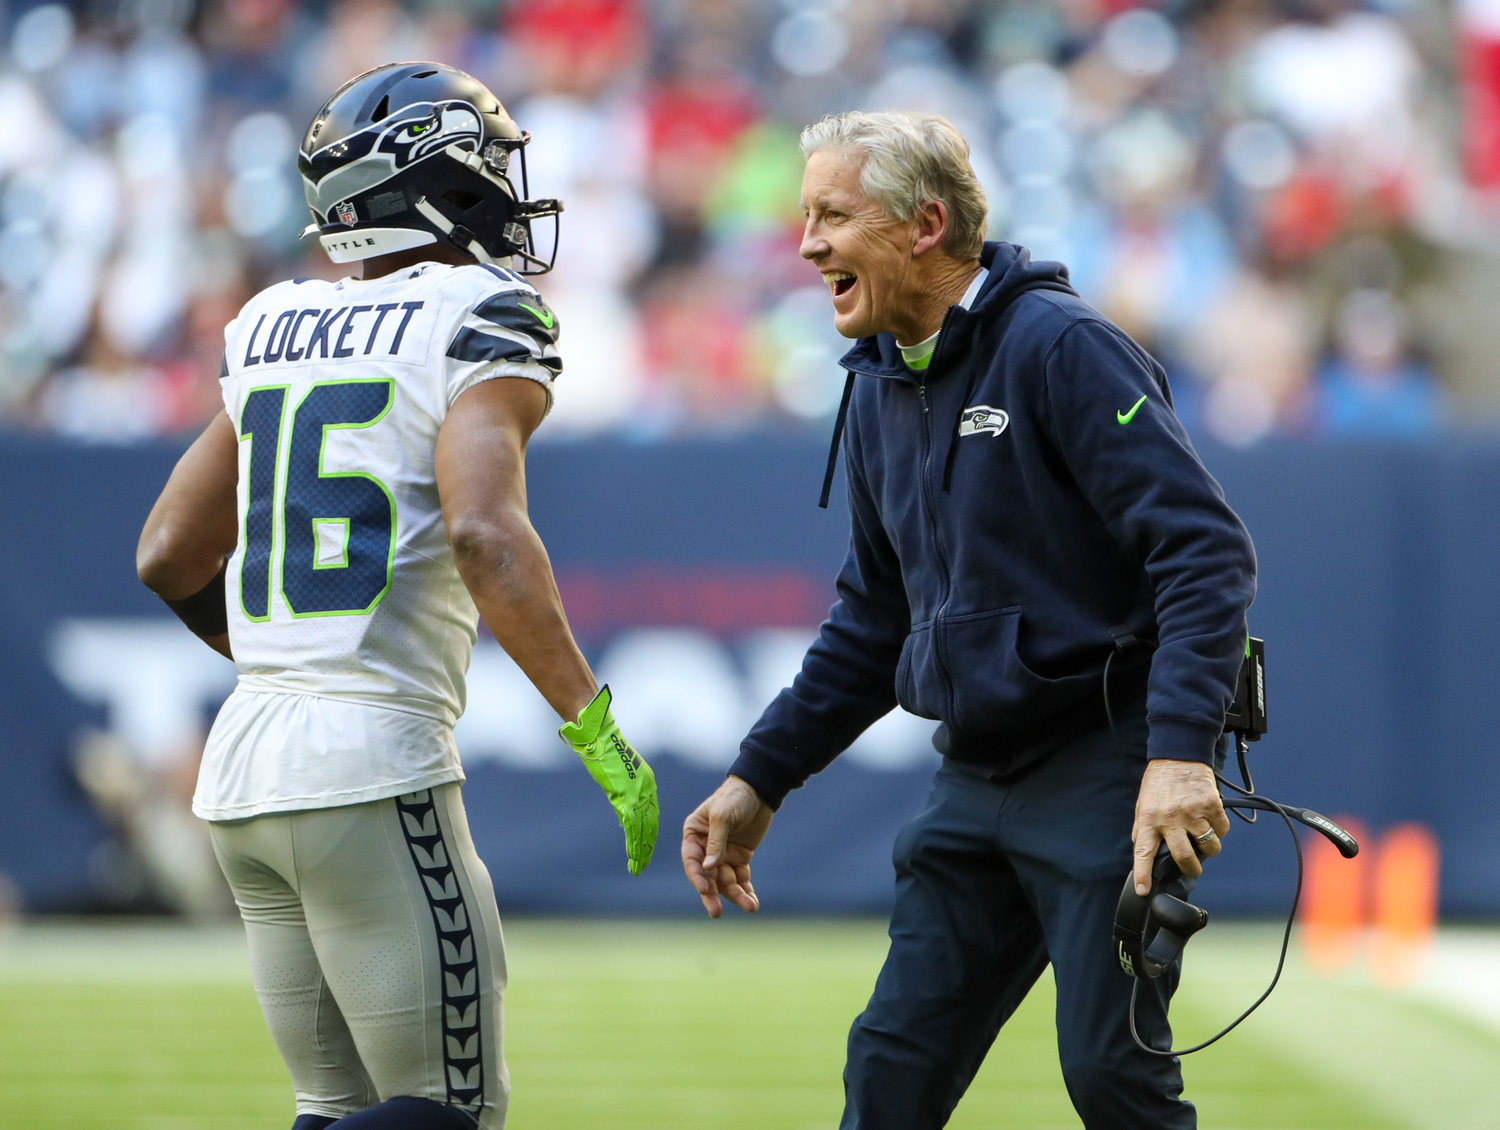 Seattle Seahawks head coach Pete Carroll congratulates wide receiver Tyler Lockett (16) after a successful two-point conversion during the second half of an NFL game between the Seahawks and the Texans on December 12, 2021 in Houston, Texas.